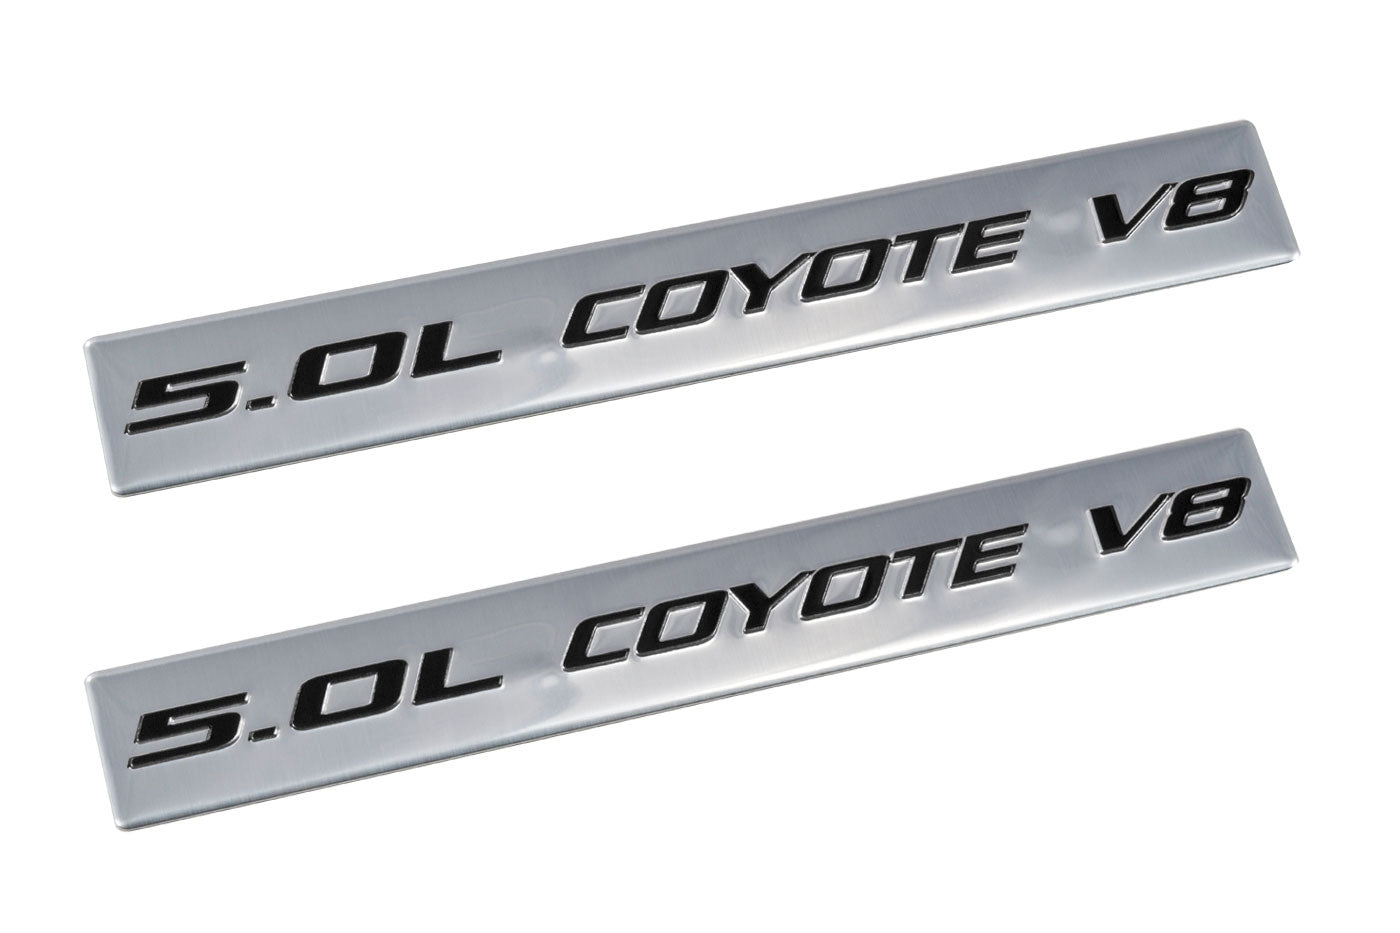 2011-2019 Ford Mustang GT Ford F150 5.0 Coyote V8 Emblems Silver & Black - Pair